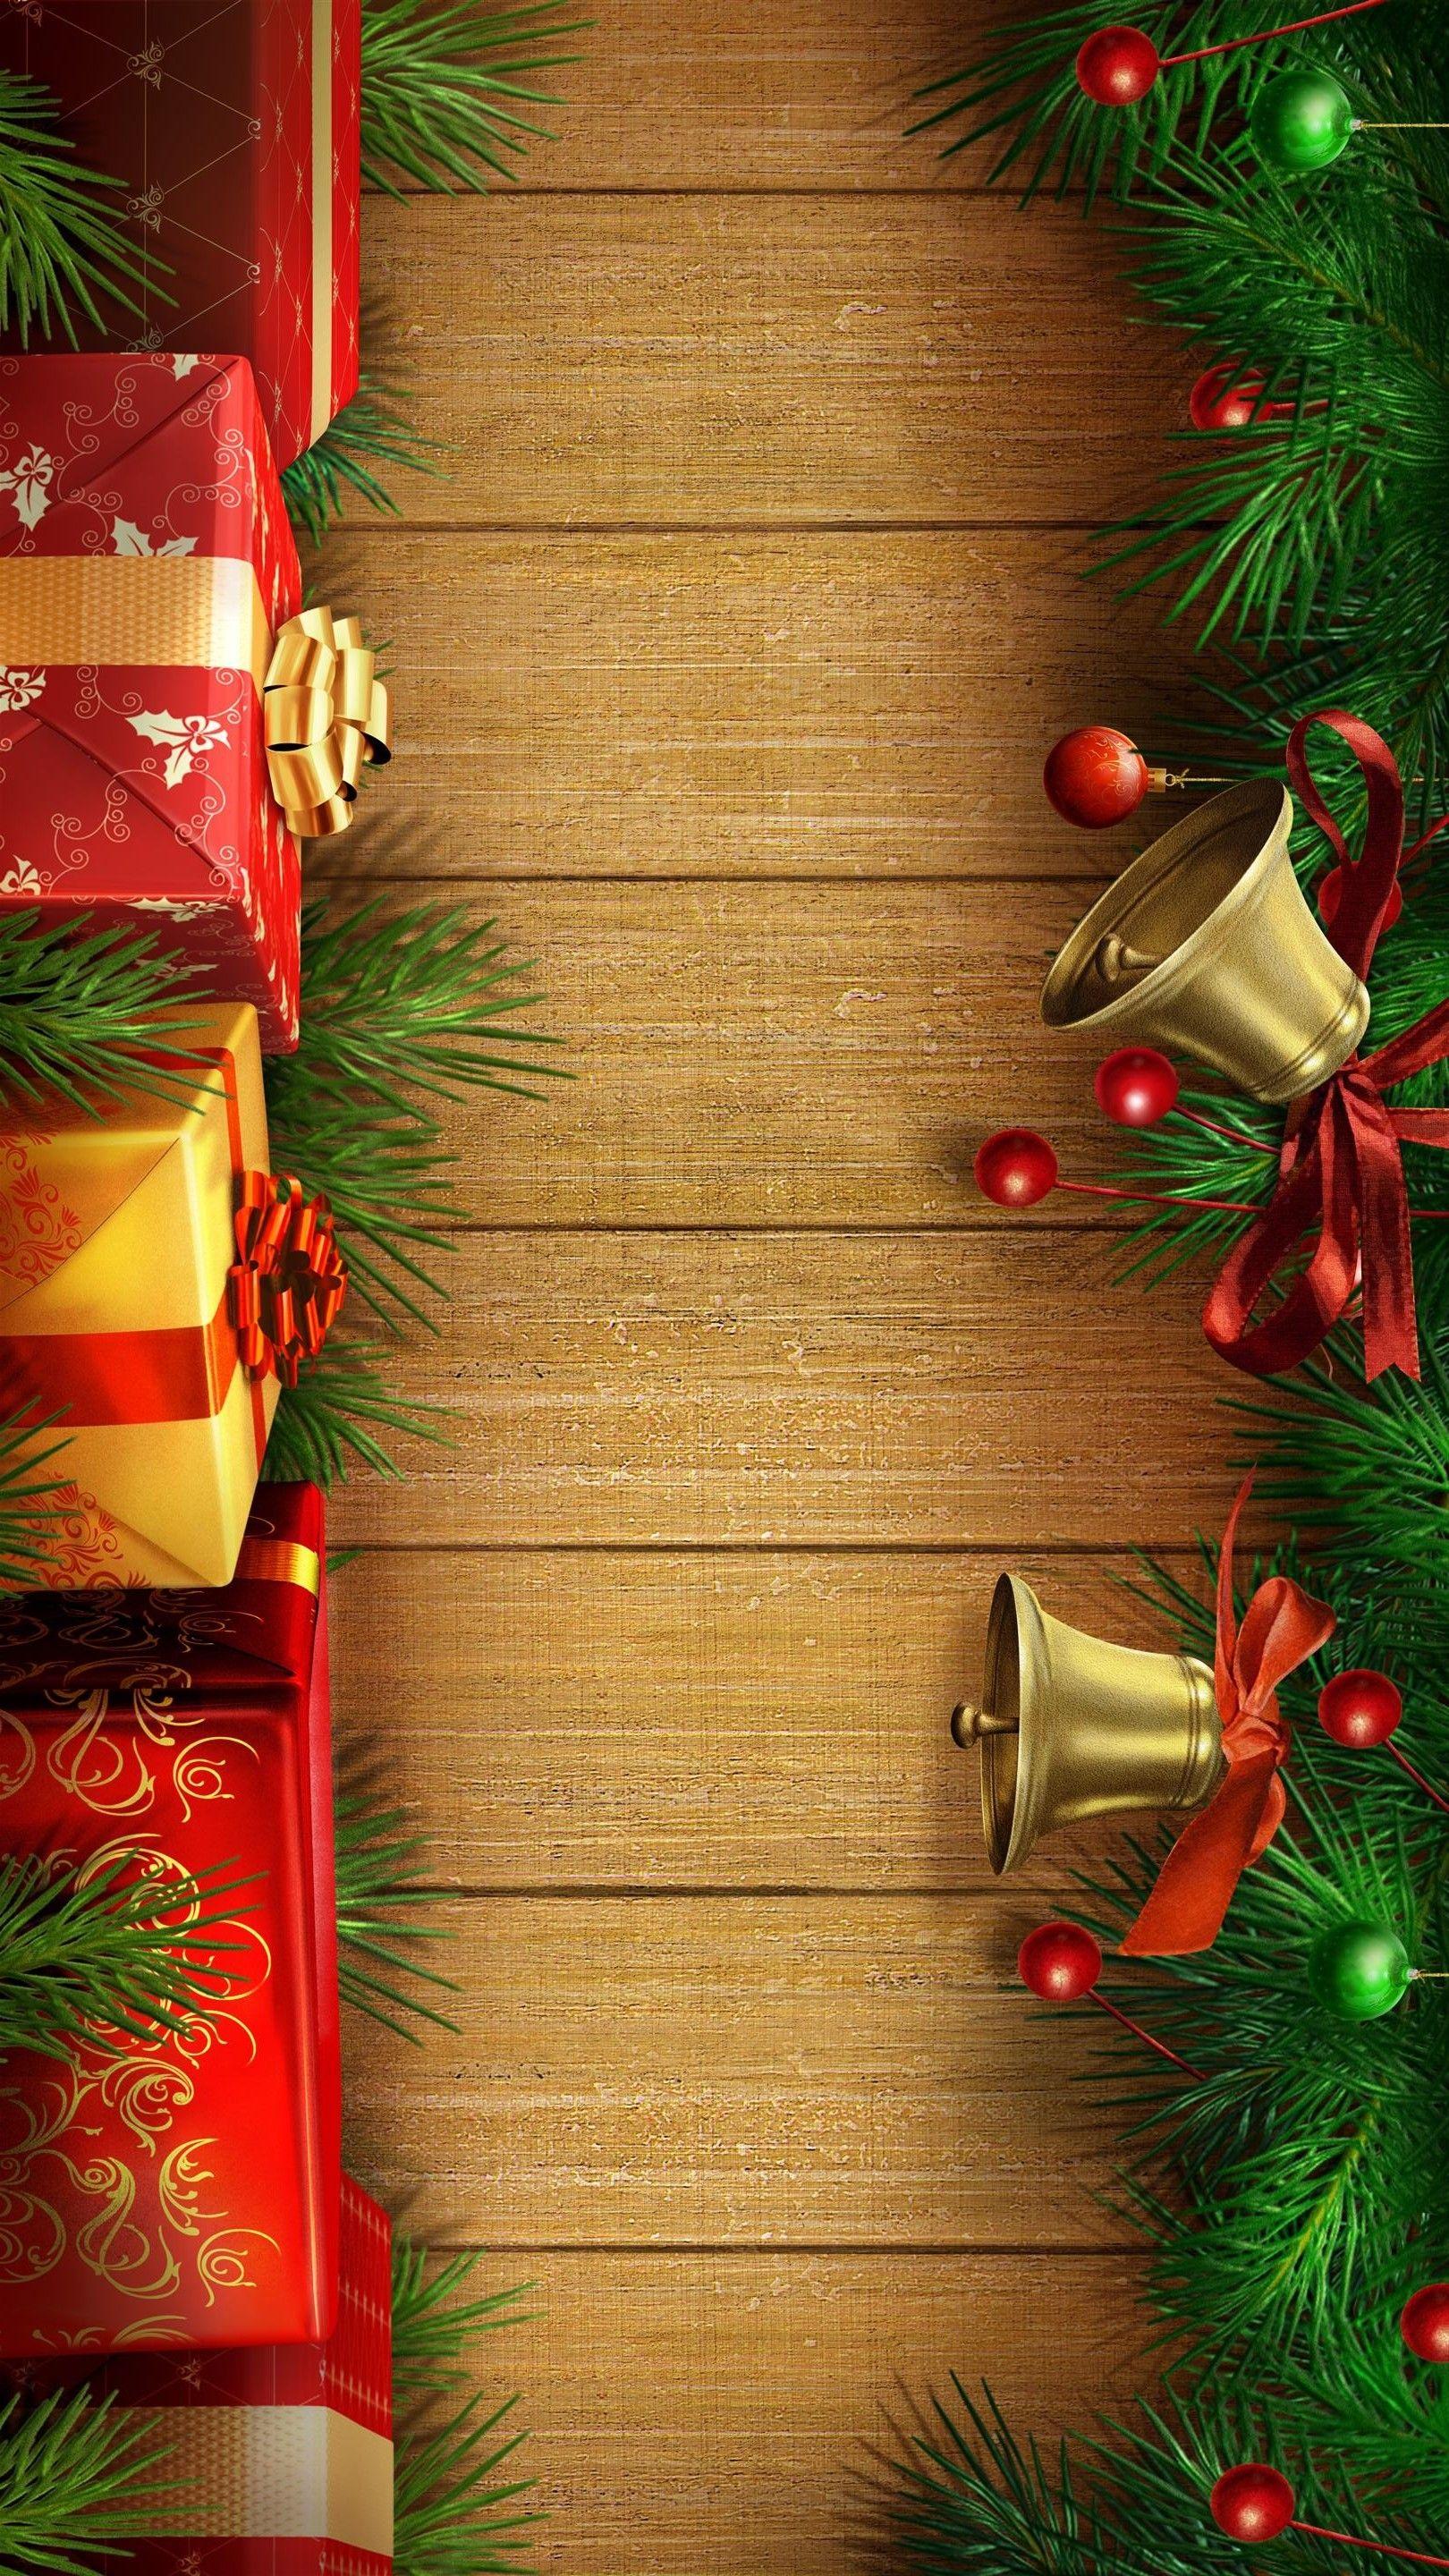 Christmas Gifts Photos Download The BEST Free Christmas Gifts Stock Photos   HD Images